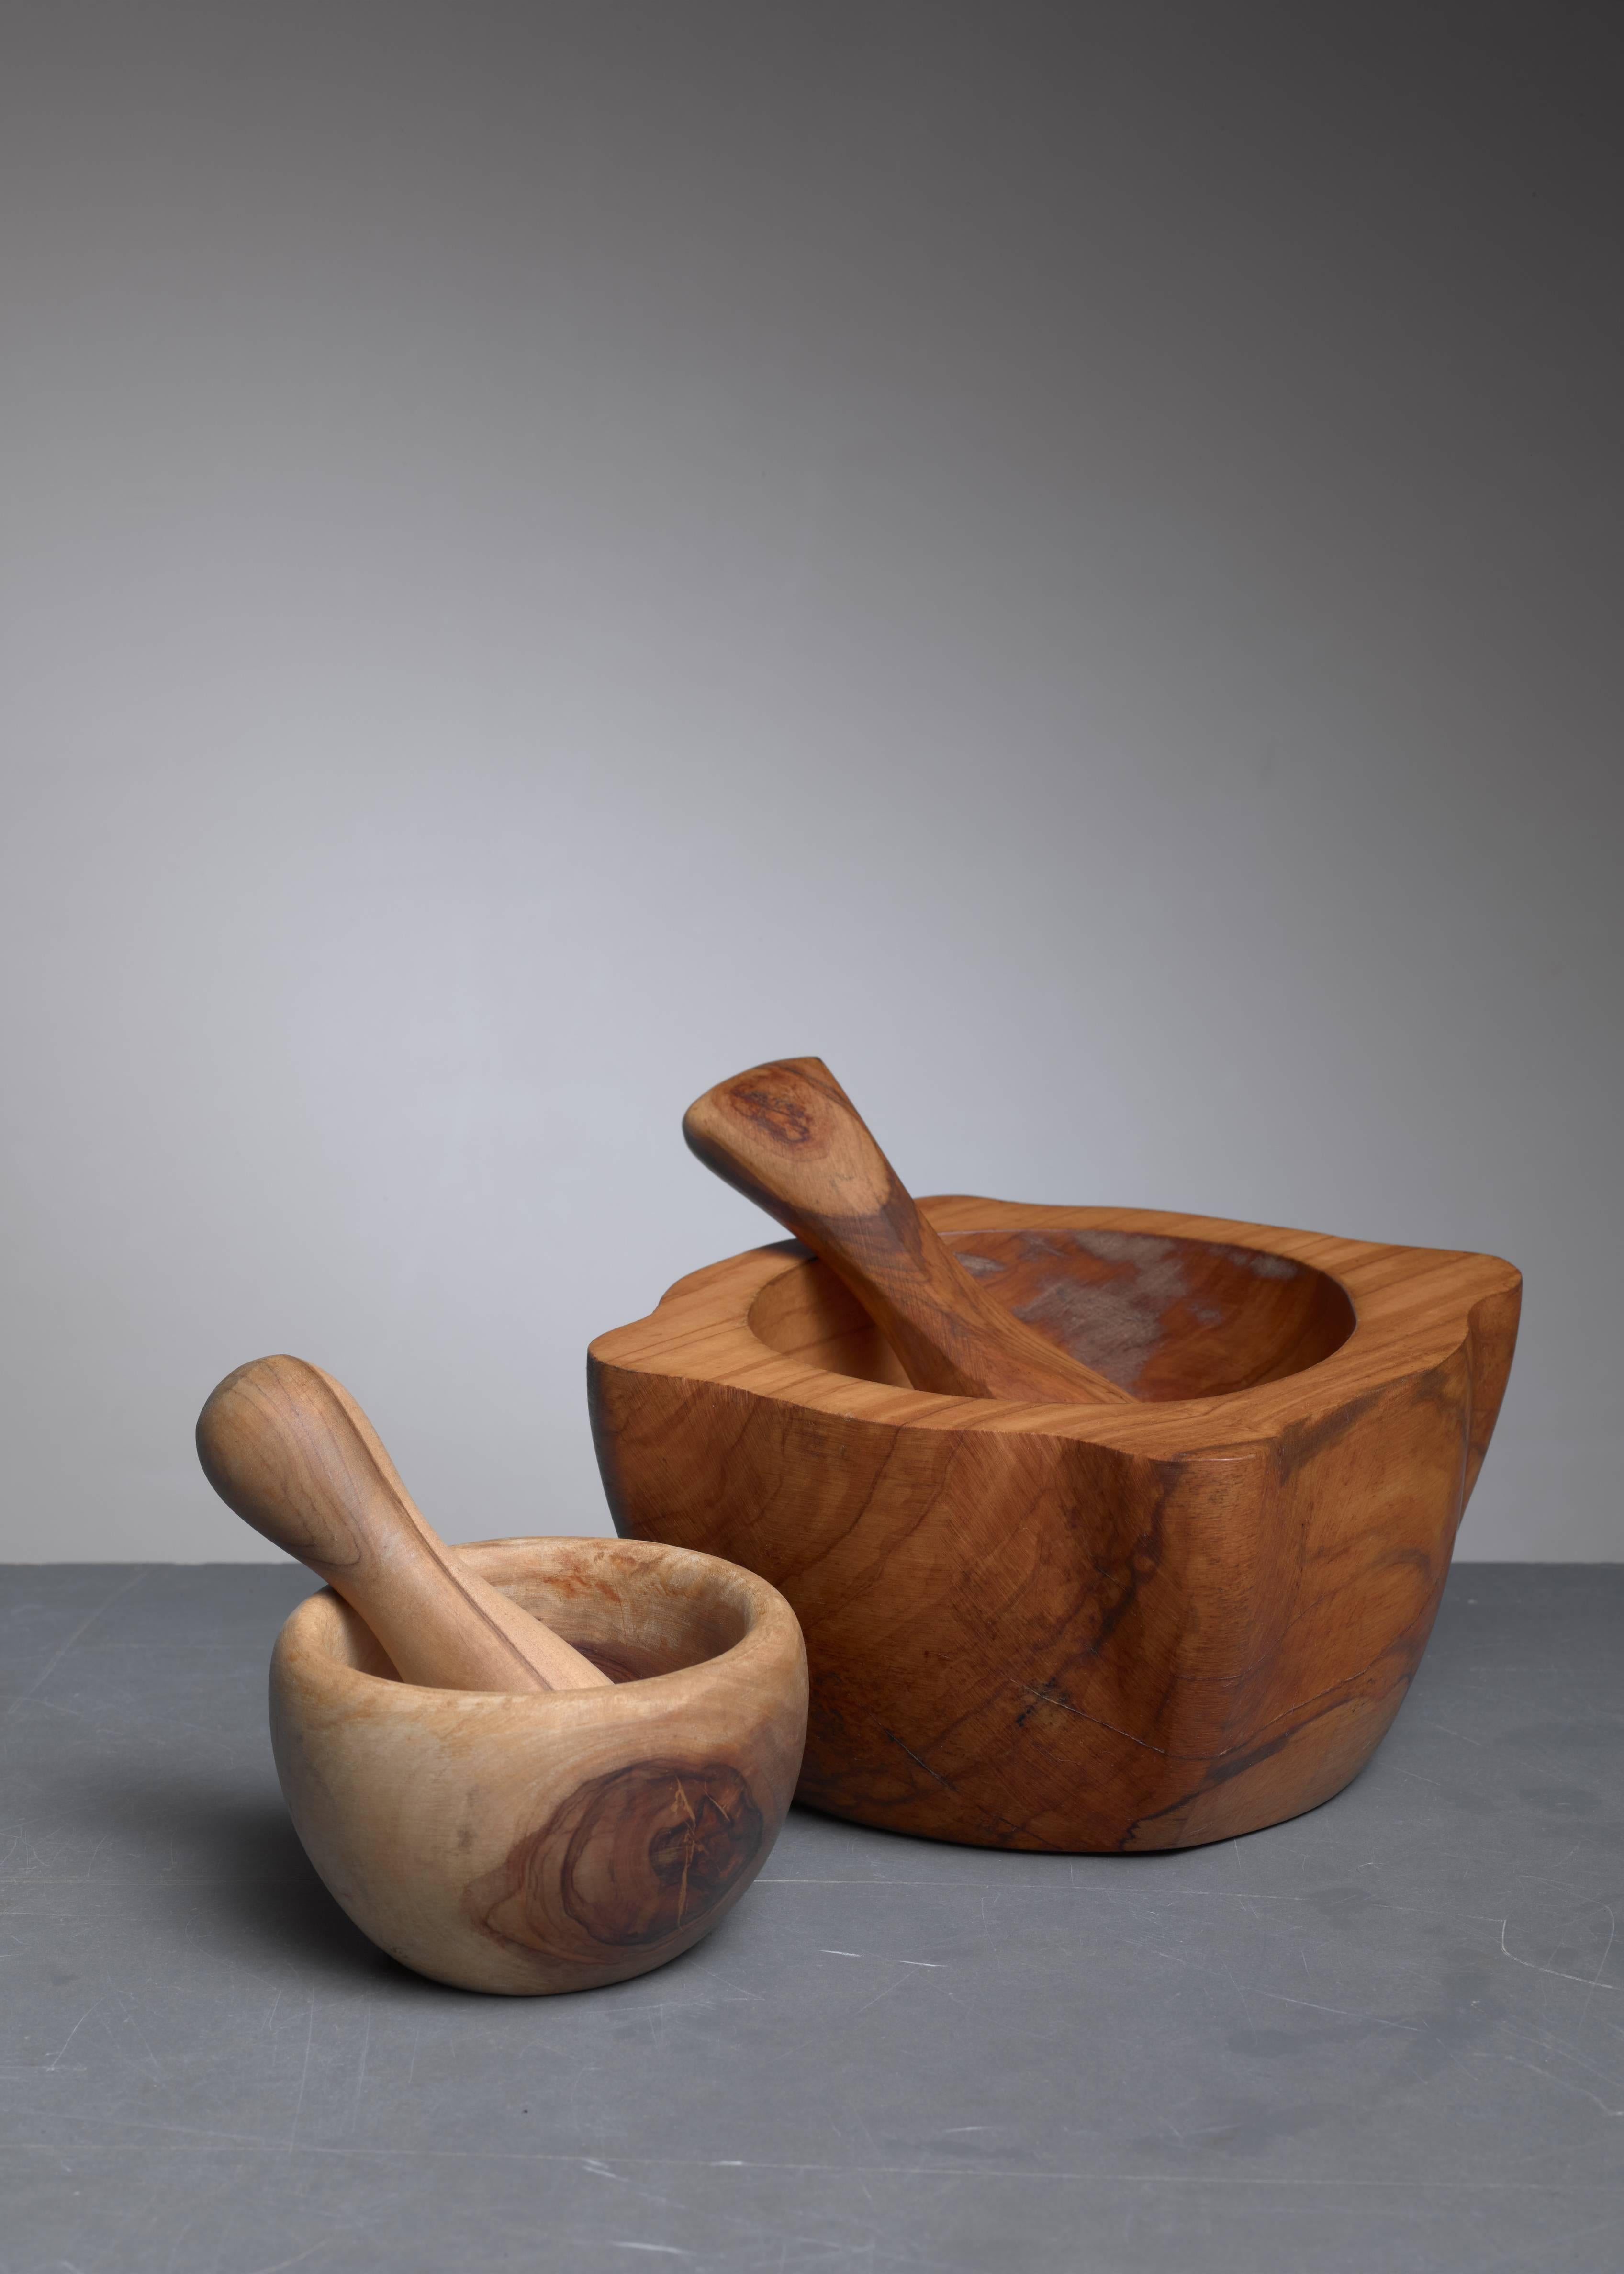 A pair of French wooden mortar and pestle sets. The sets are very decorative and pragmatic as they are useable. It is a joy to see and feel their beauty and free the natural smells from the herbs when using this Classic kitchen instrument. The